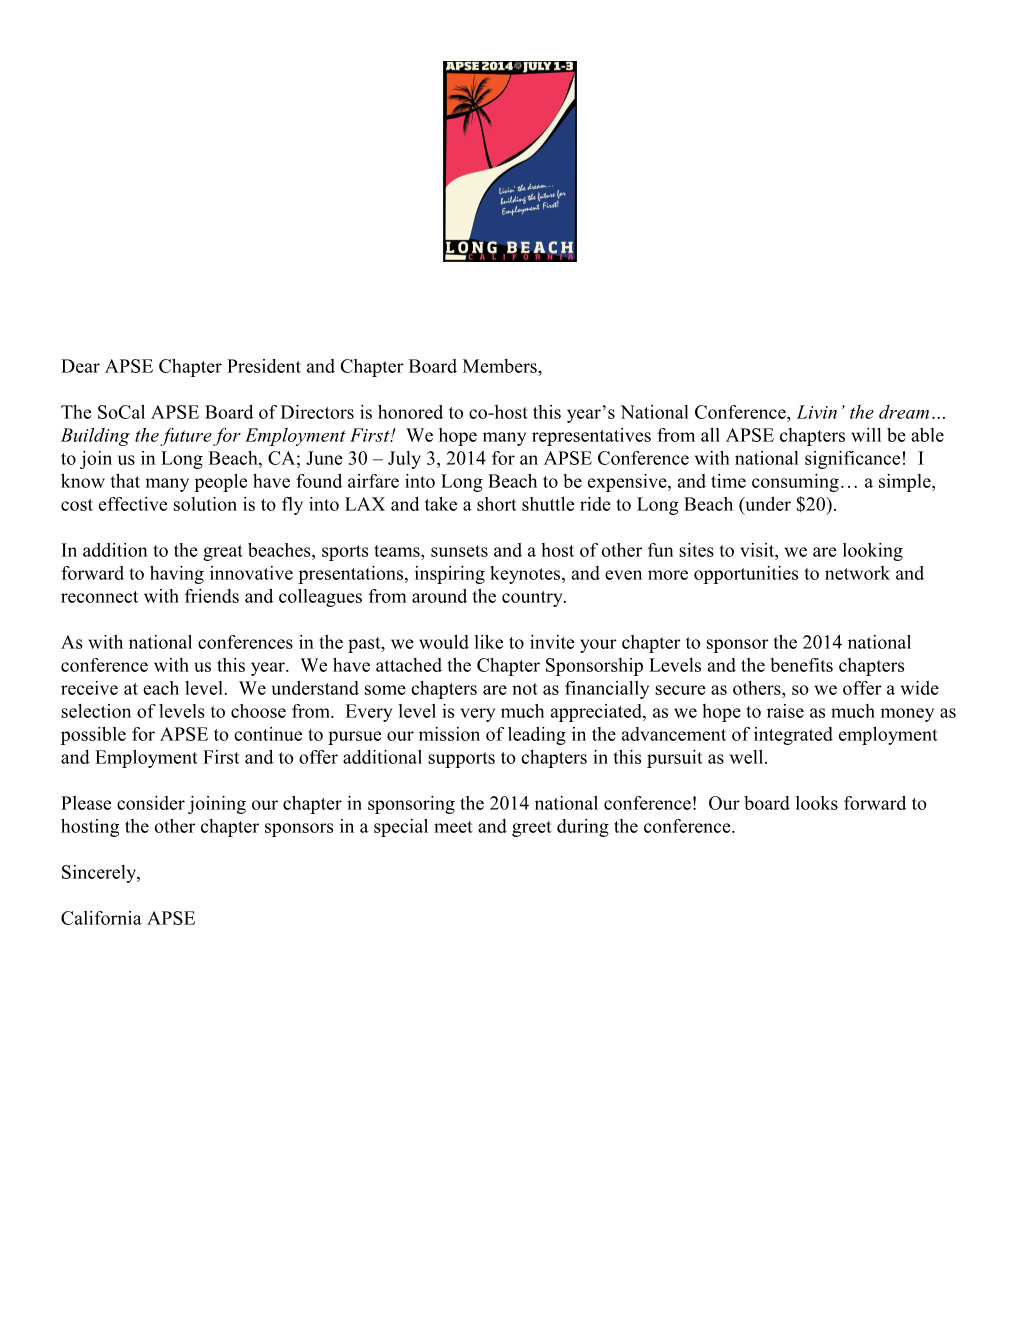 Dear APSE Chapter President and Chapter Board Members